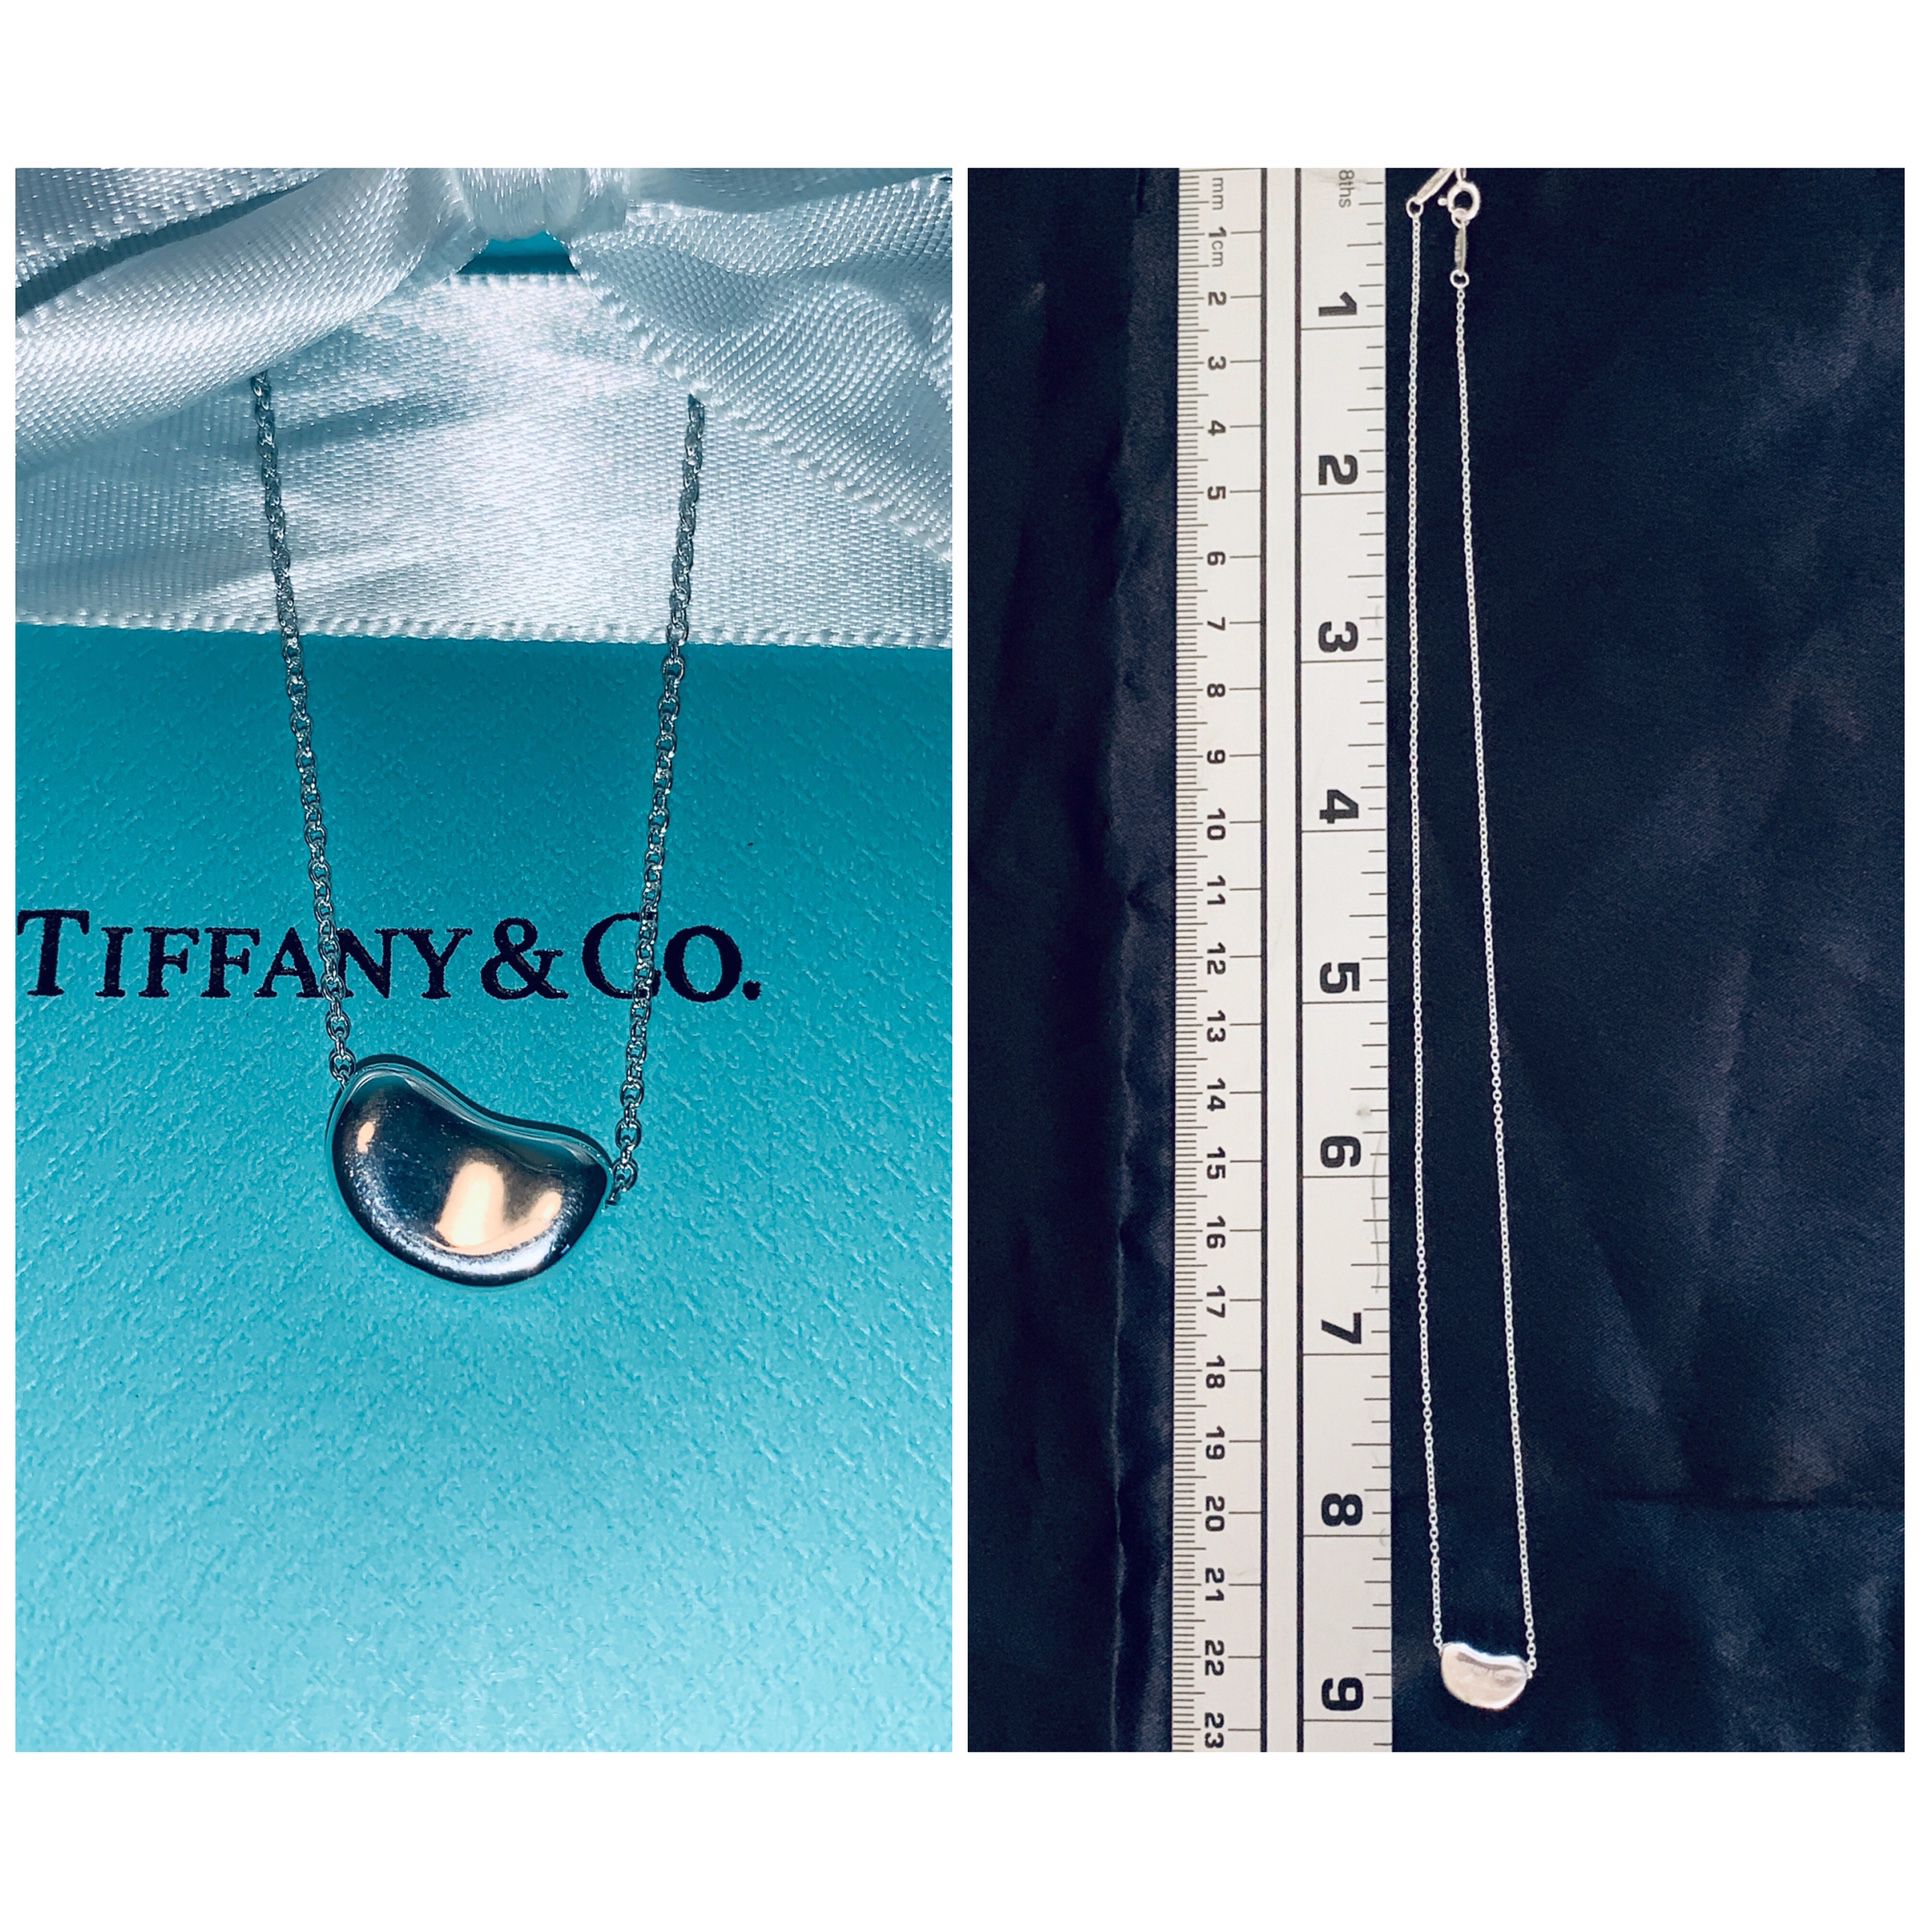 Tiffany and co. Bean necklace